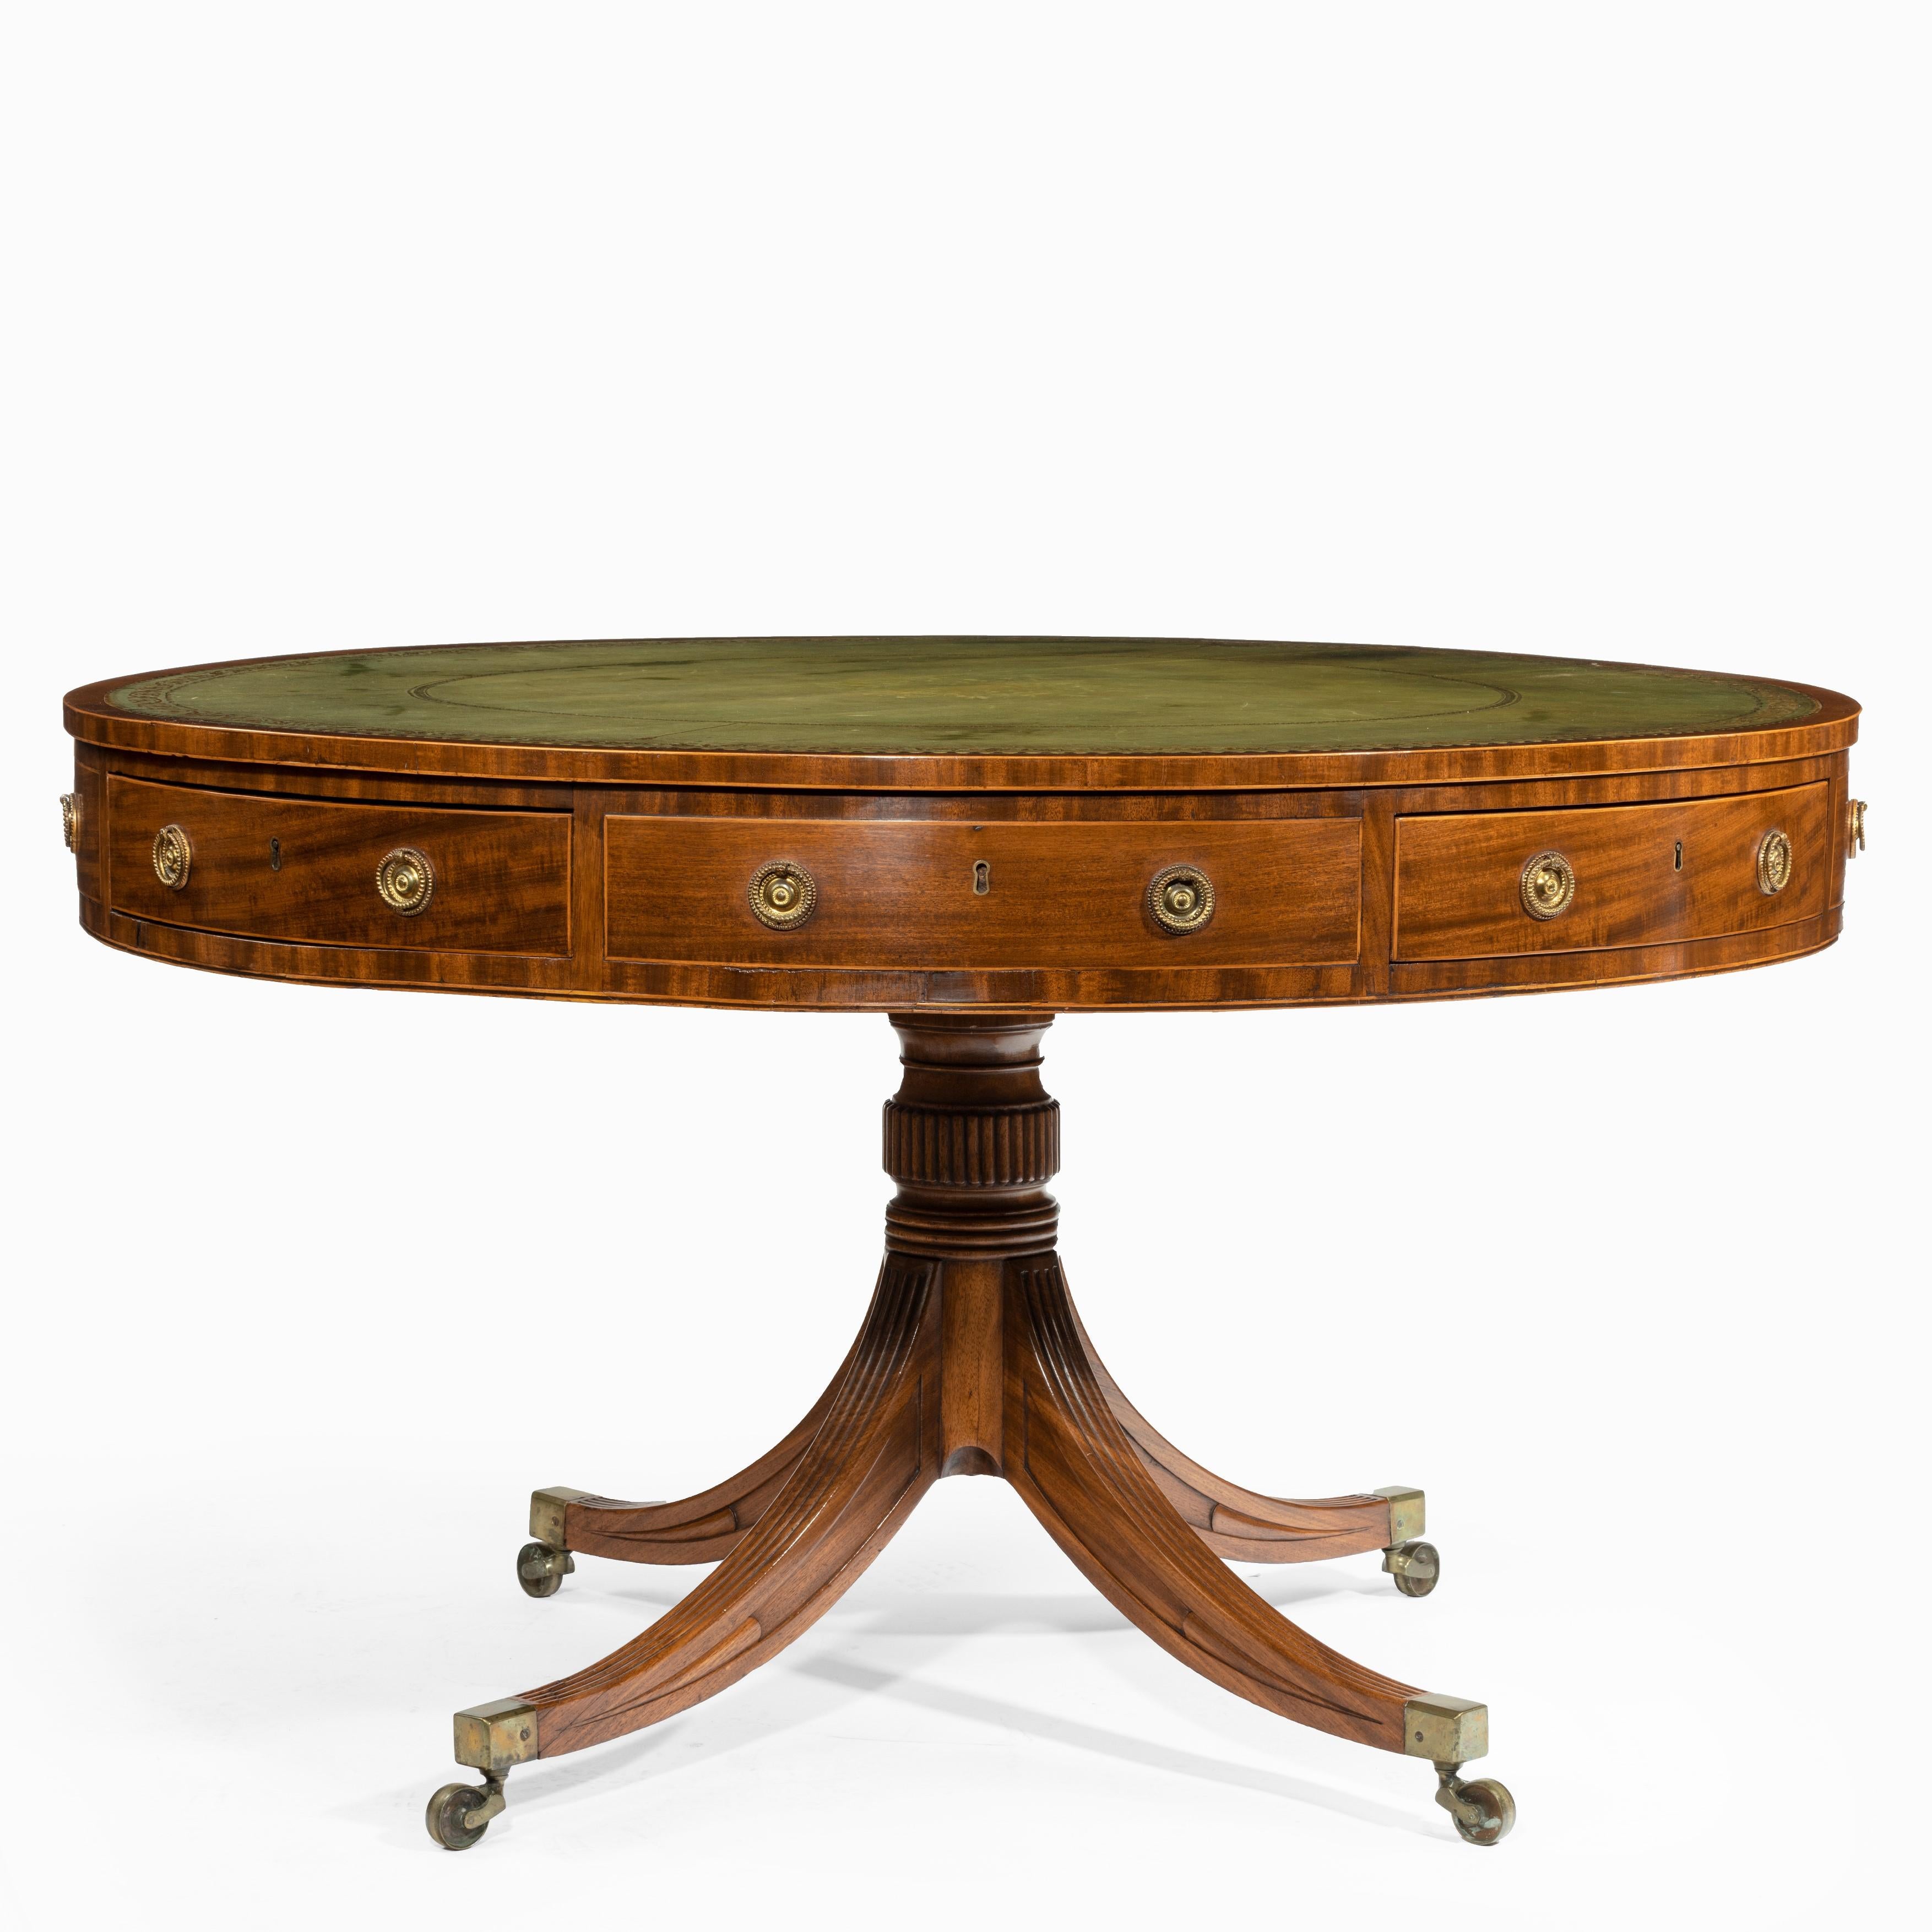 Late George III Revolving Mahogany Drum Table Attributed to Gillows For Sale 2